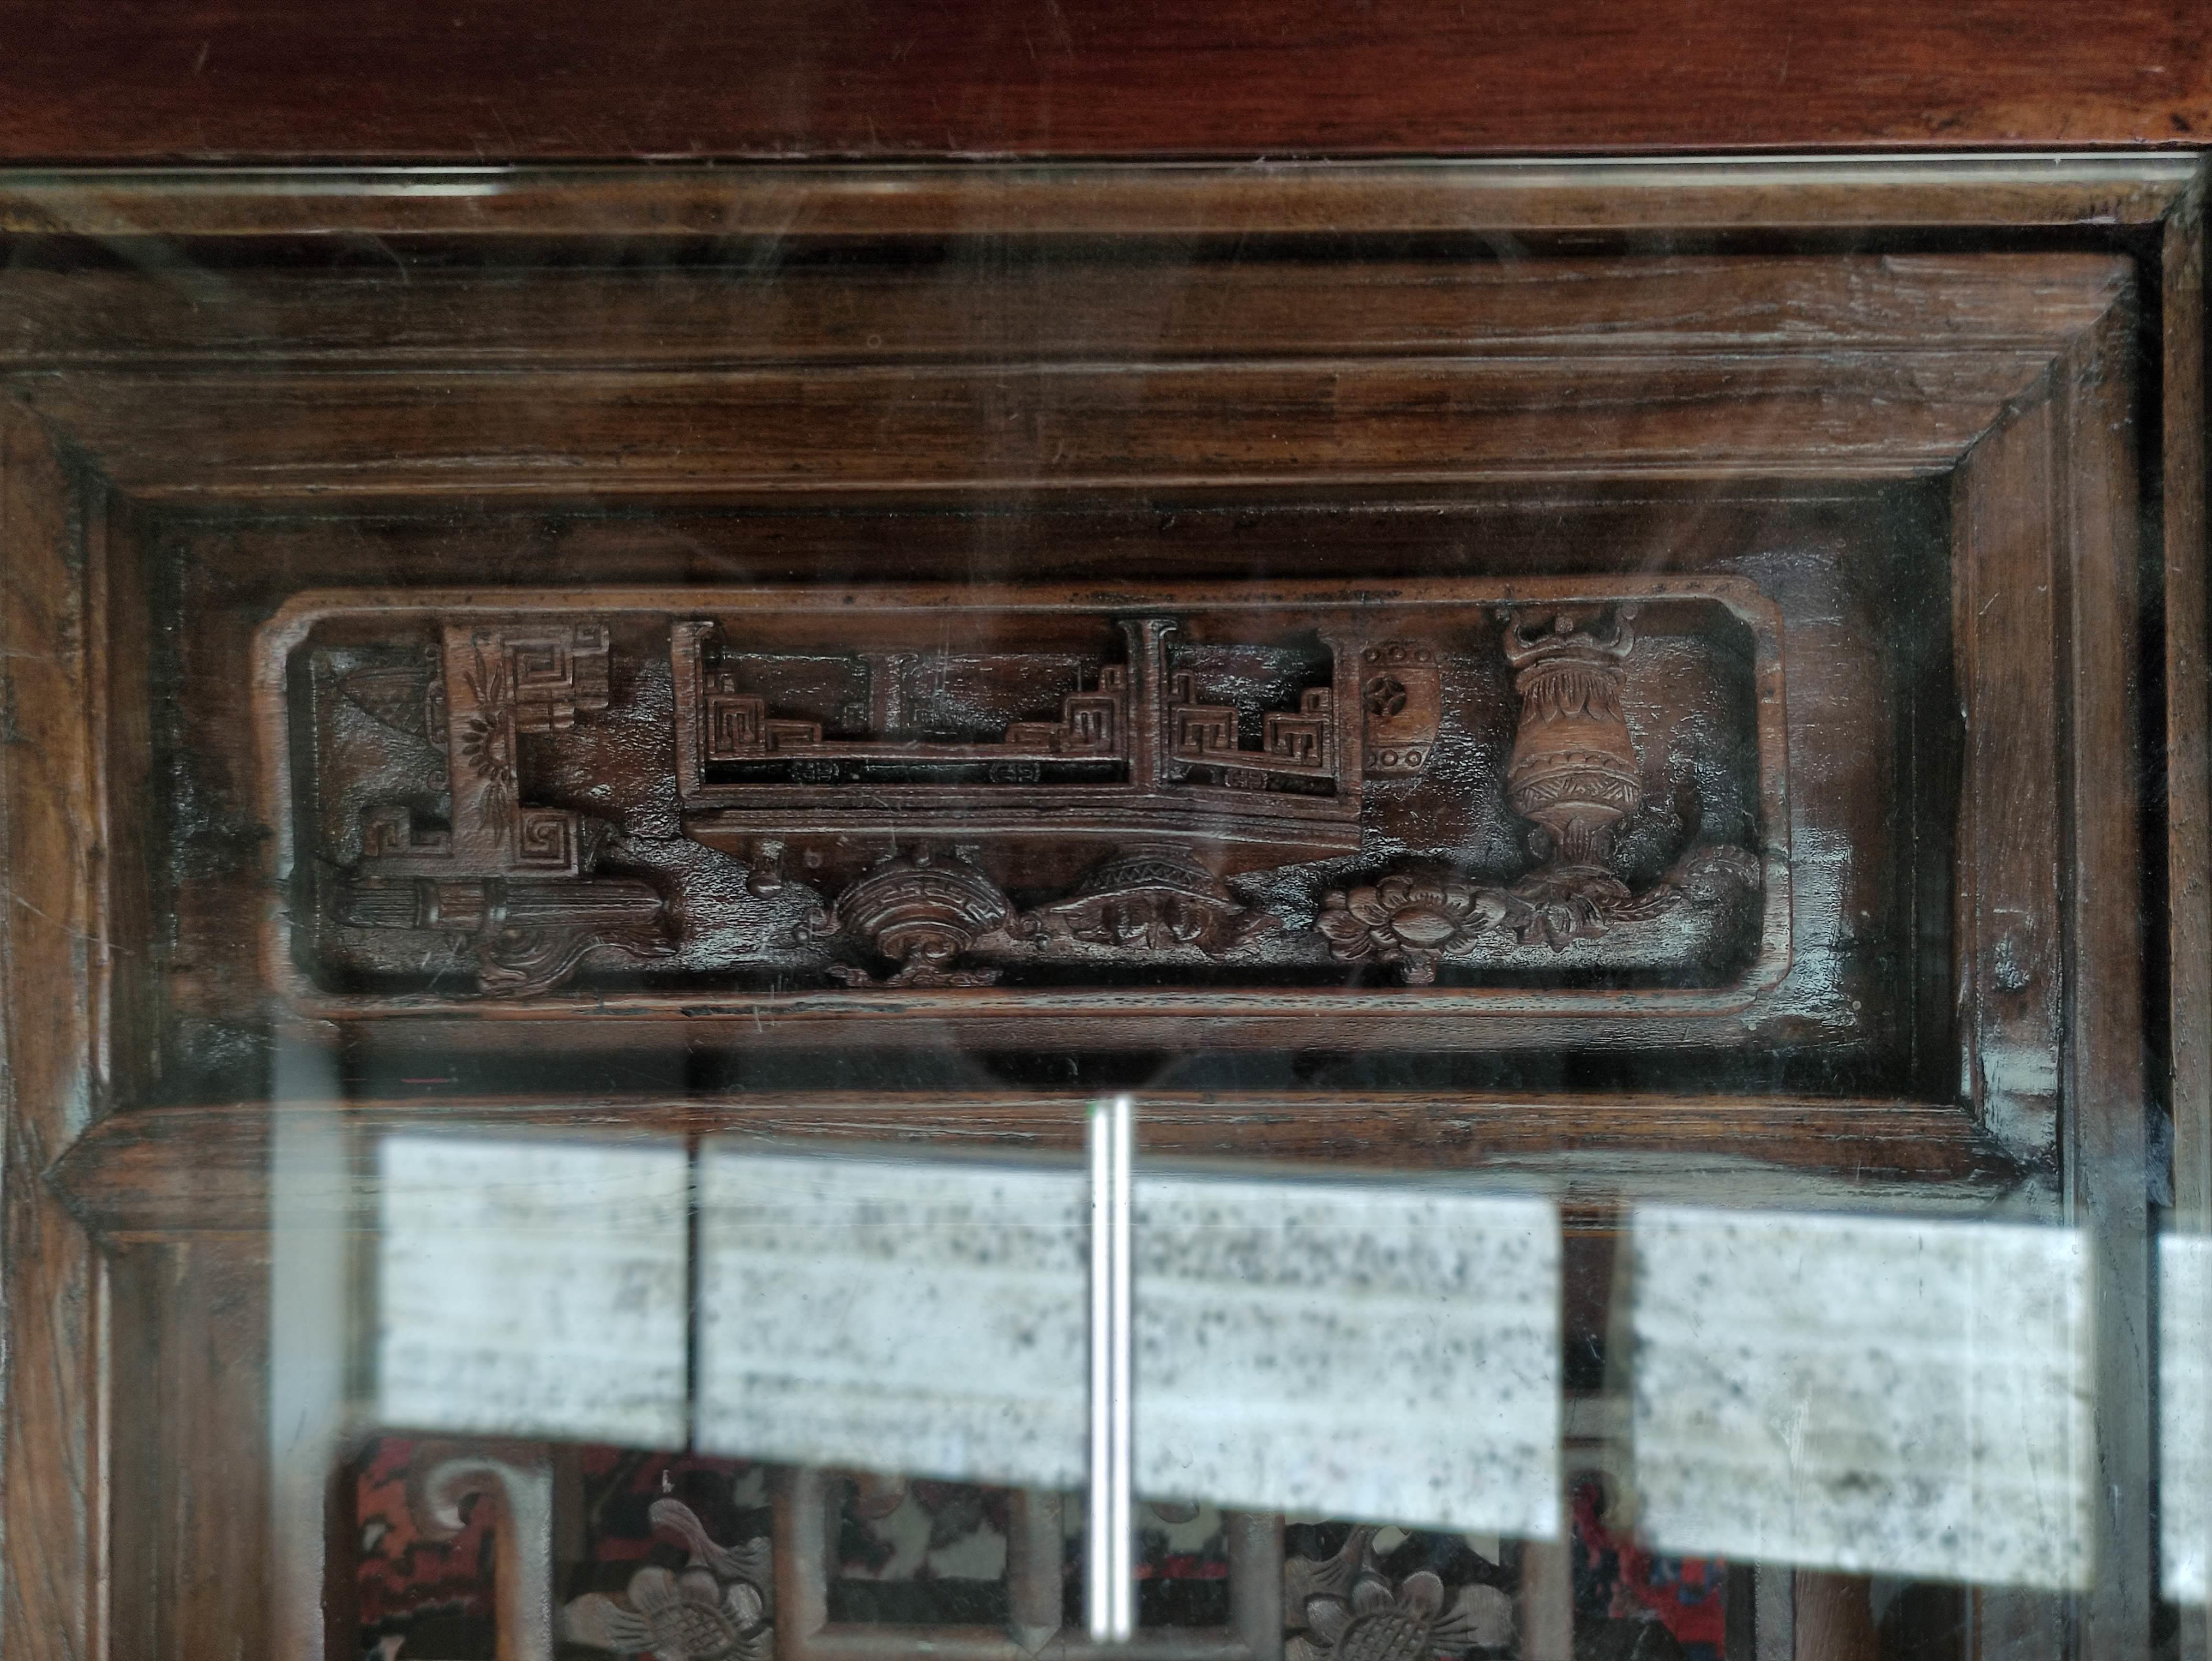 Chinese pierced carved window panel, circa mid 18th century possibly made from padouk wood, fixed to - Image 4 of 4